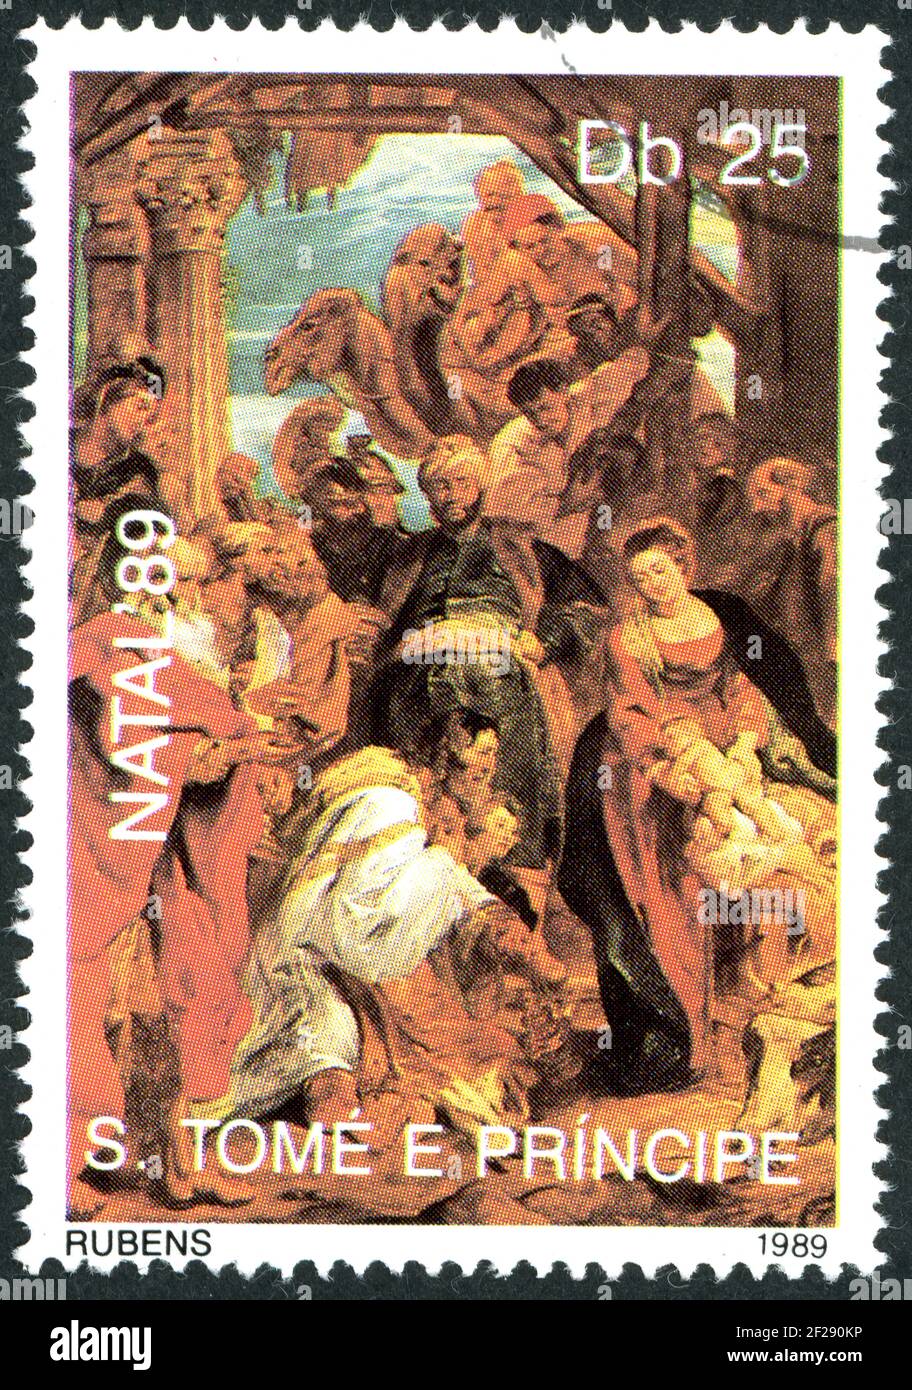 ST. THOMAS AND PRINCE - CIRCA 1989: A stamp printed in Saint Thomas and Prince, shown the painting by Rubens - Adoration of the kings, circa 1989 Stock Photo